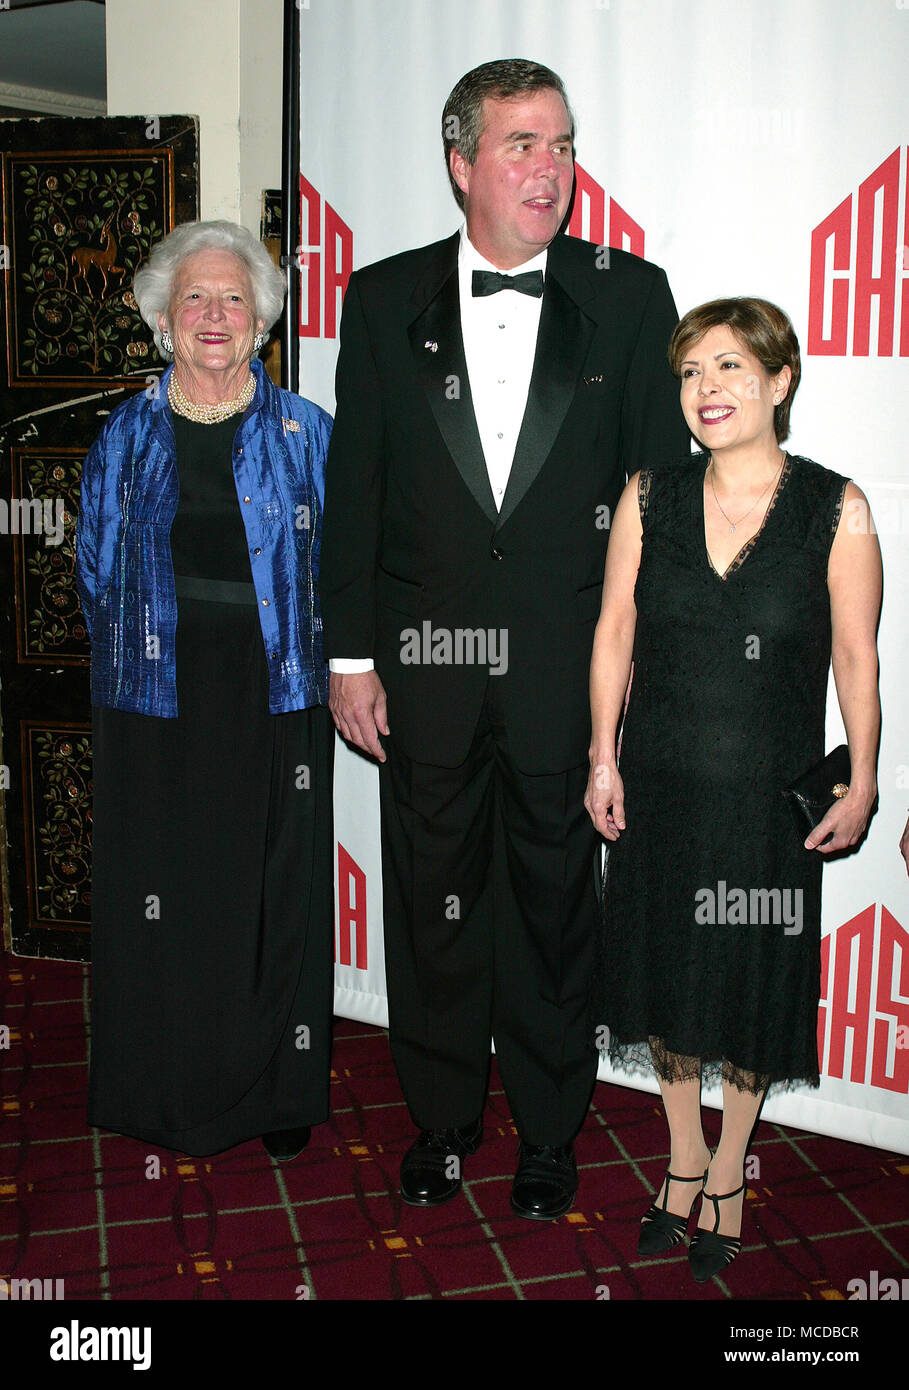 Barbara Bush with son Governor Jeb Bush and his wife Columbia Bush attend CASA'S Eleventh Anniversary Awards Dinner Honors American Leadership in Combating Substance Abuse. Waldorf Astoria Hotel, NYC. April 2, 2003 Credit: Walter McBride/MediaPunch Stock Photo